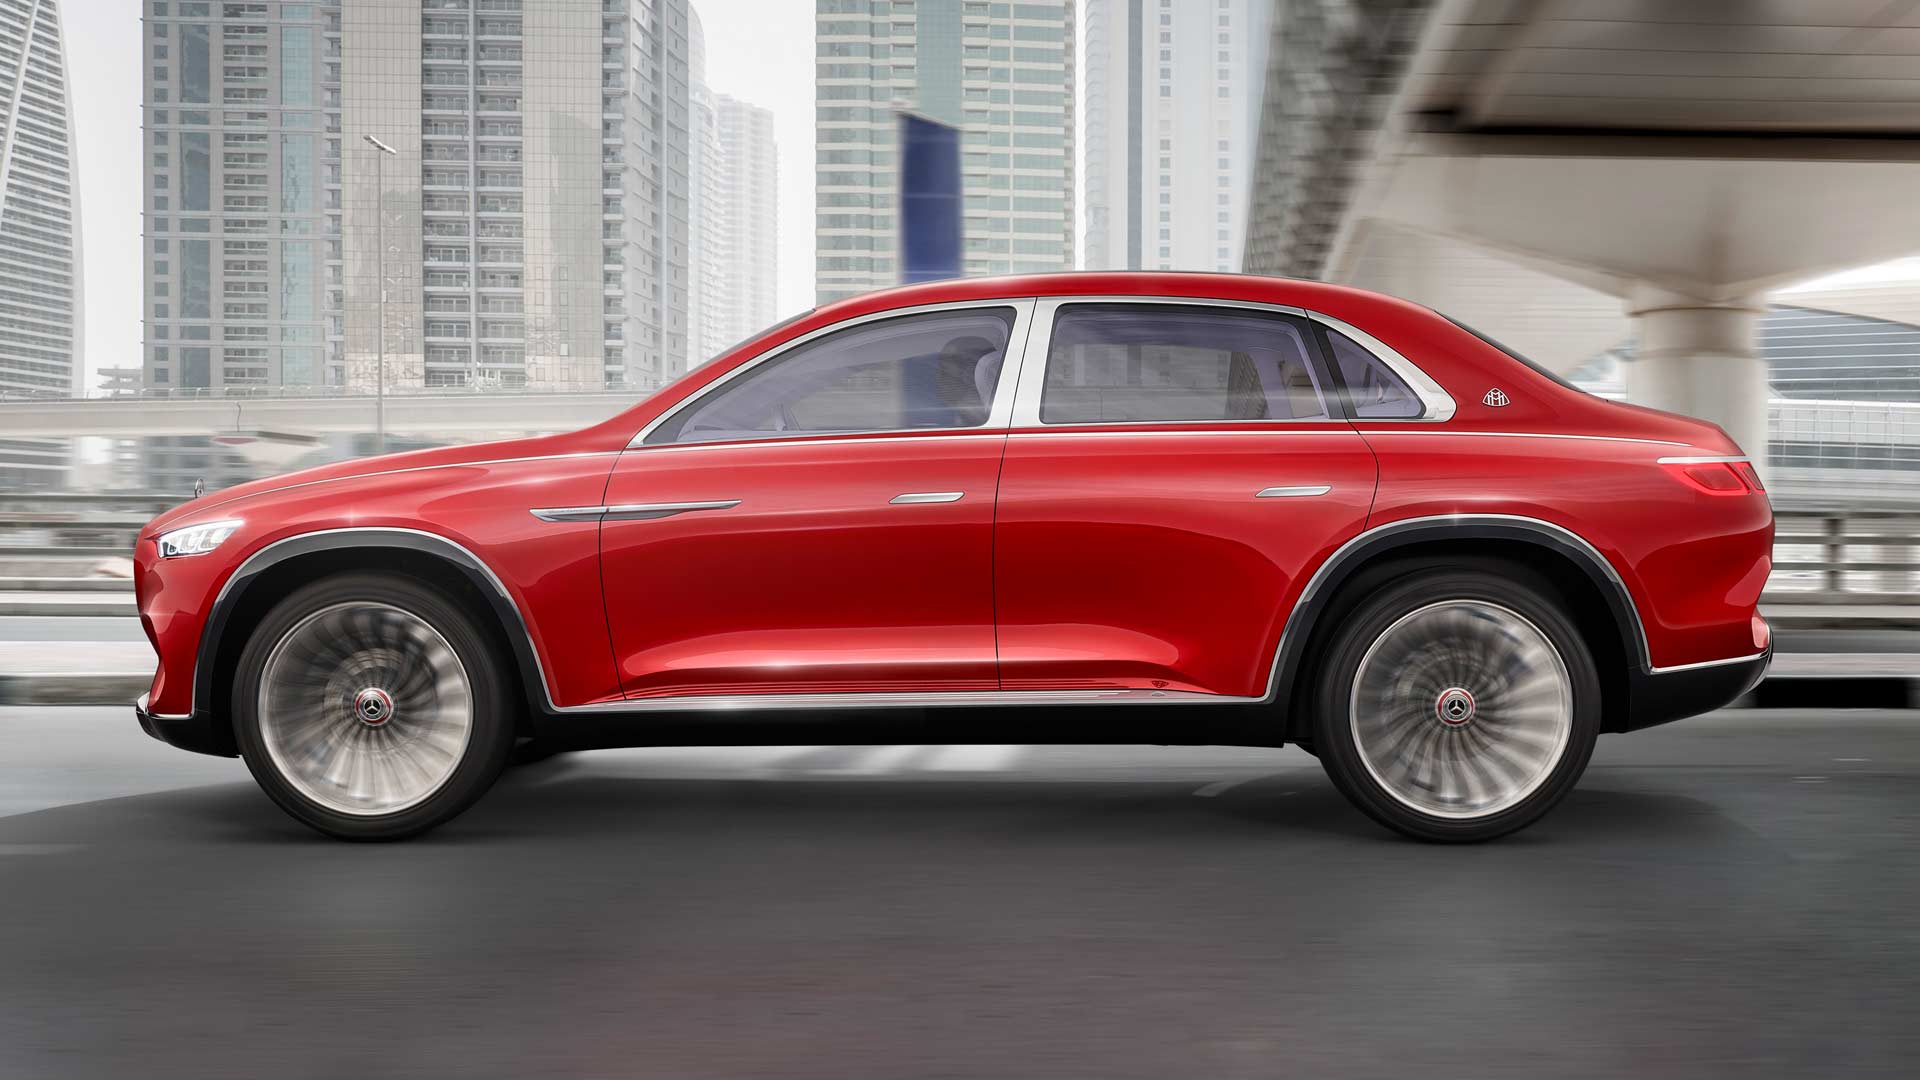 Vision-Mercedes-Maybach-Ultimate-Luxury-Crossover-SUV_4